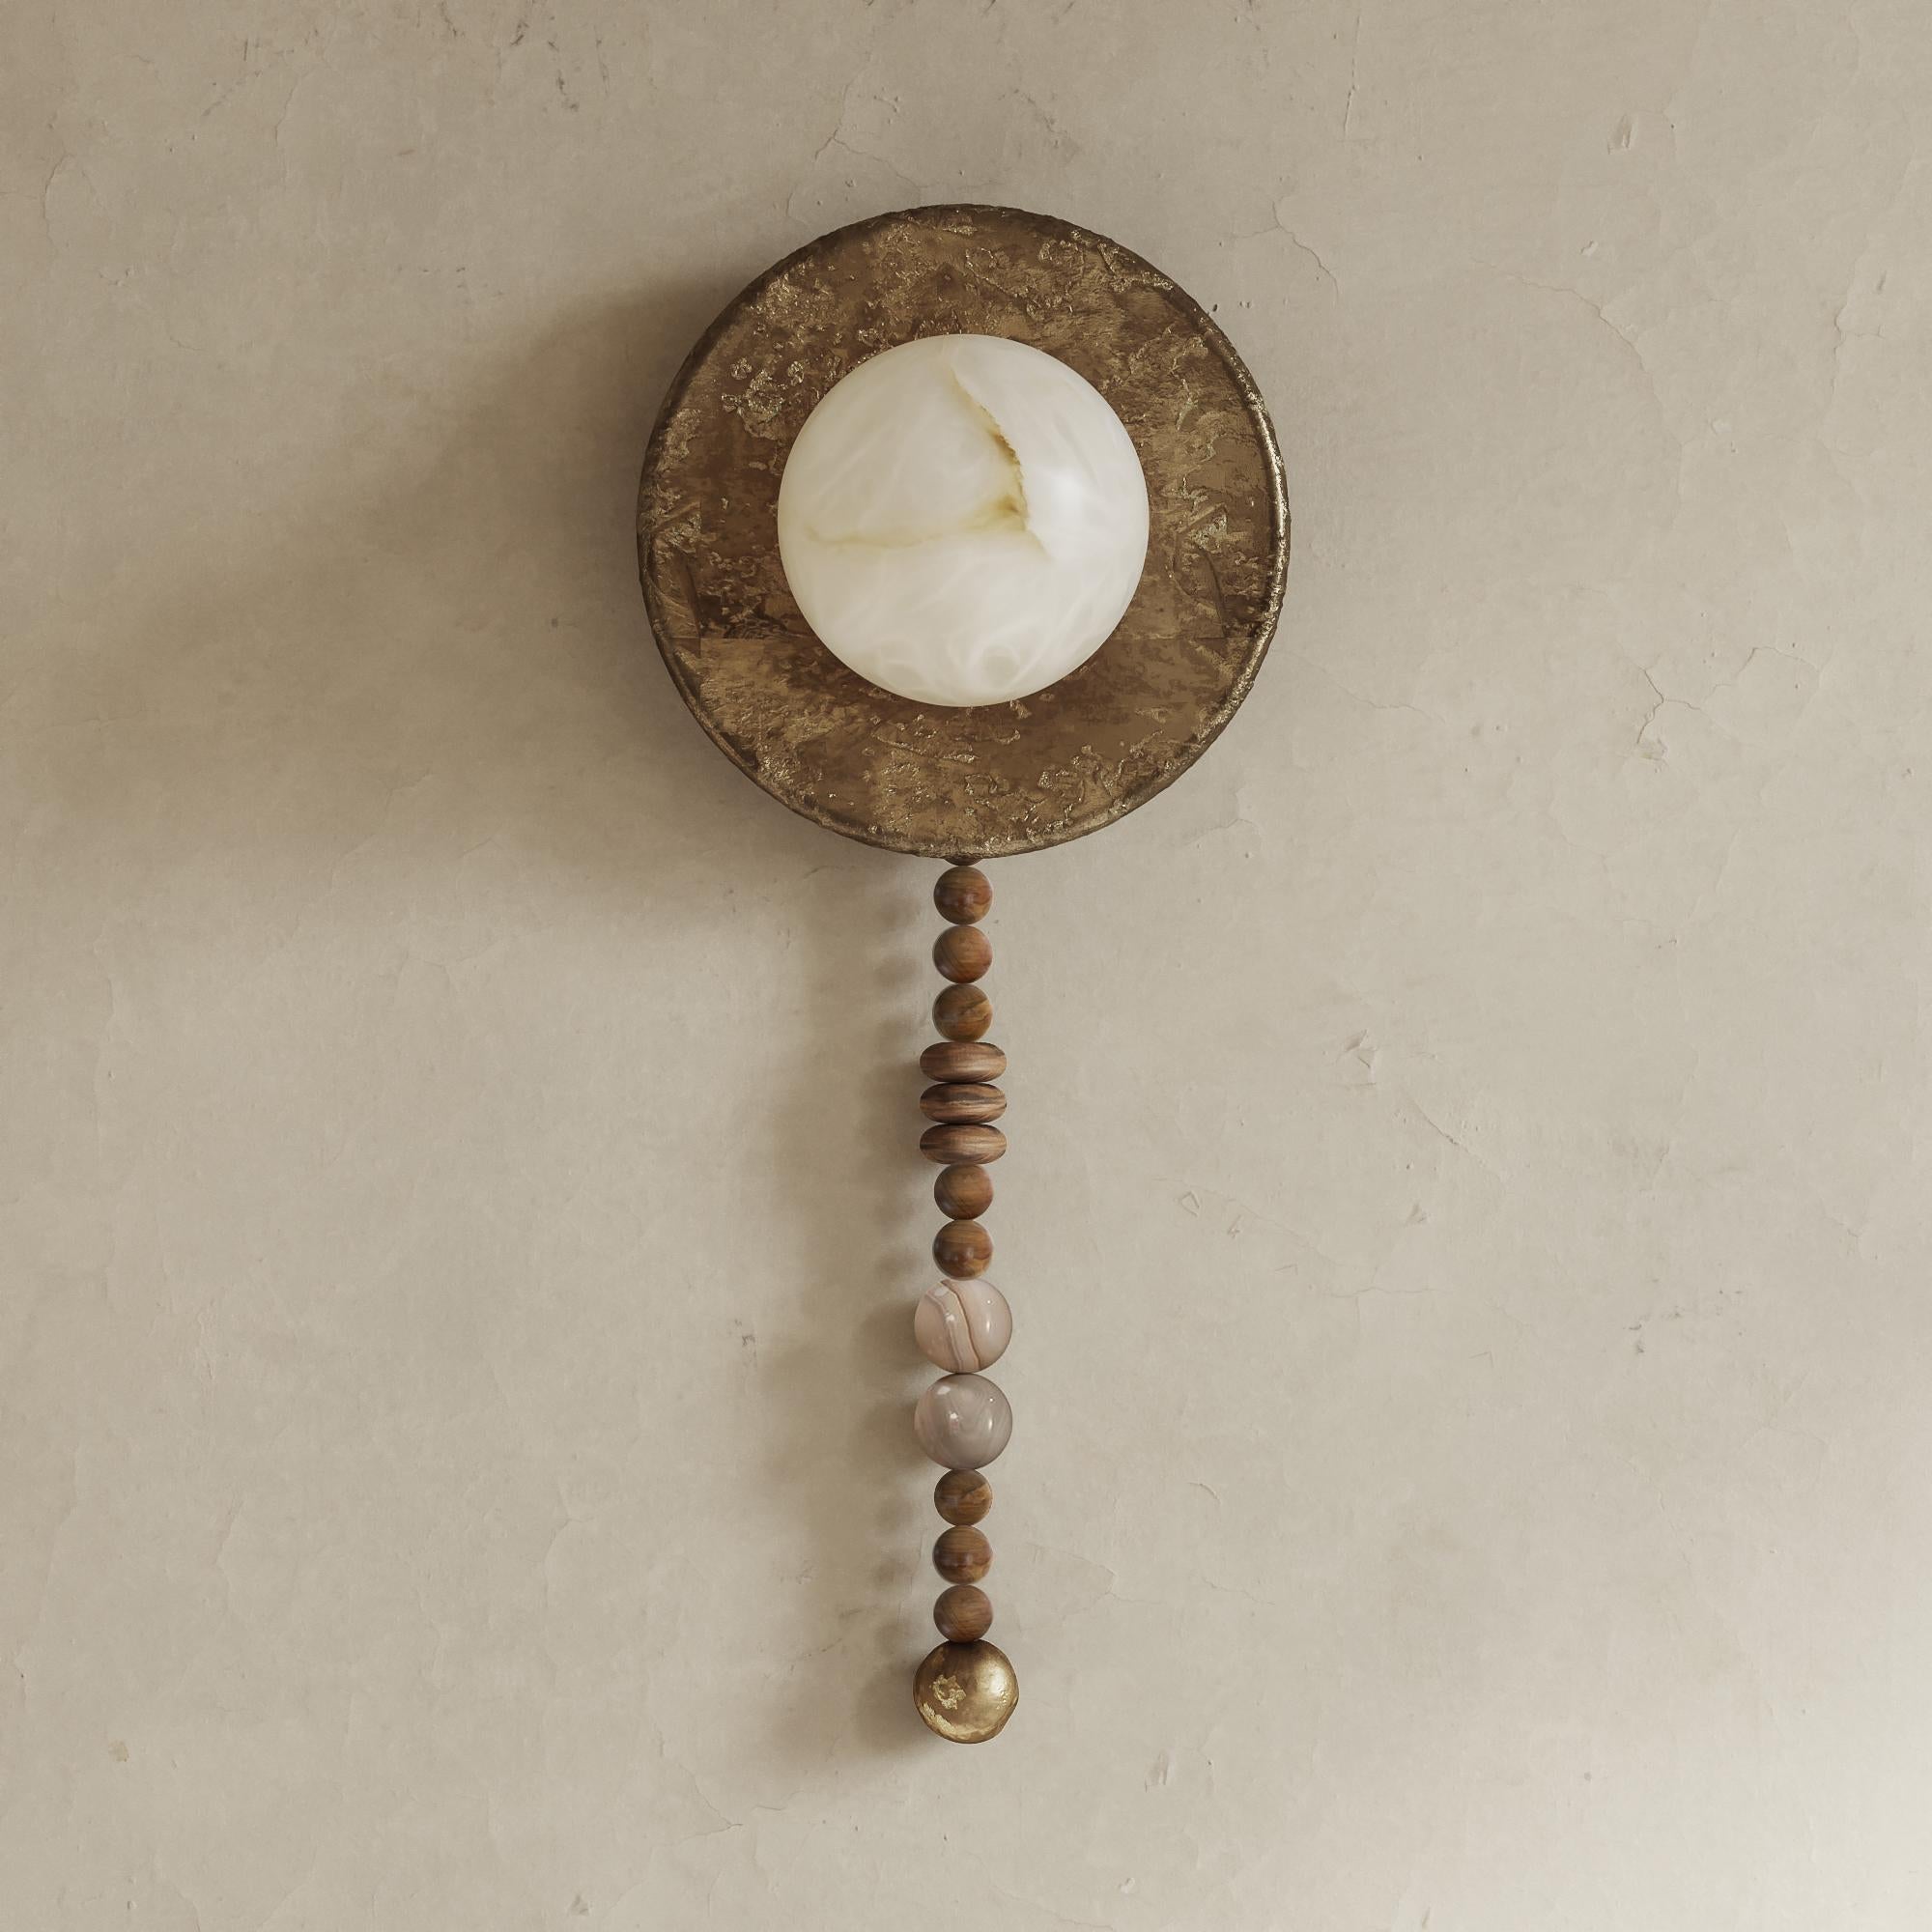 The Iris Wall Sconces a handcrafted lighting fixture, which incorporates solid wood, alabaster and liquid bronze to create a unique appearance. Traditional techniques such as casting and hand sculpting are used in its creation, and each piece is